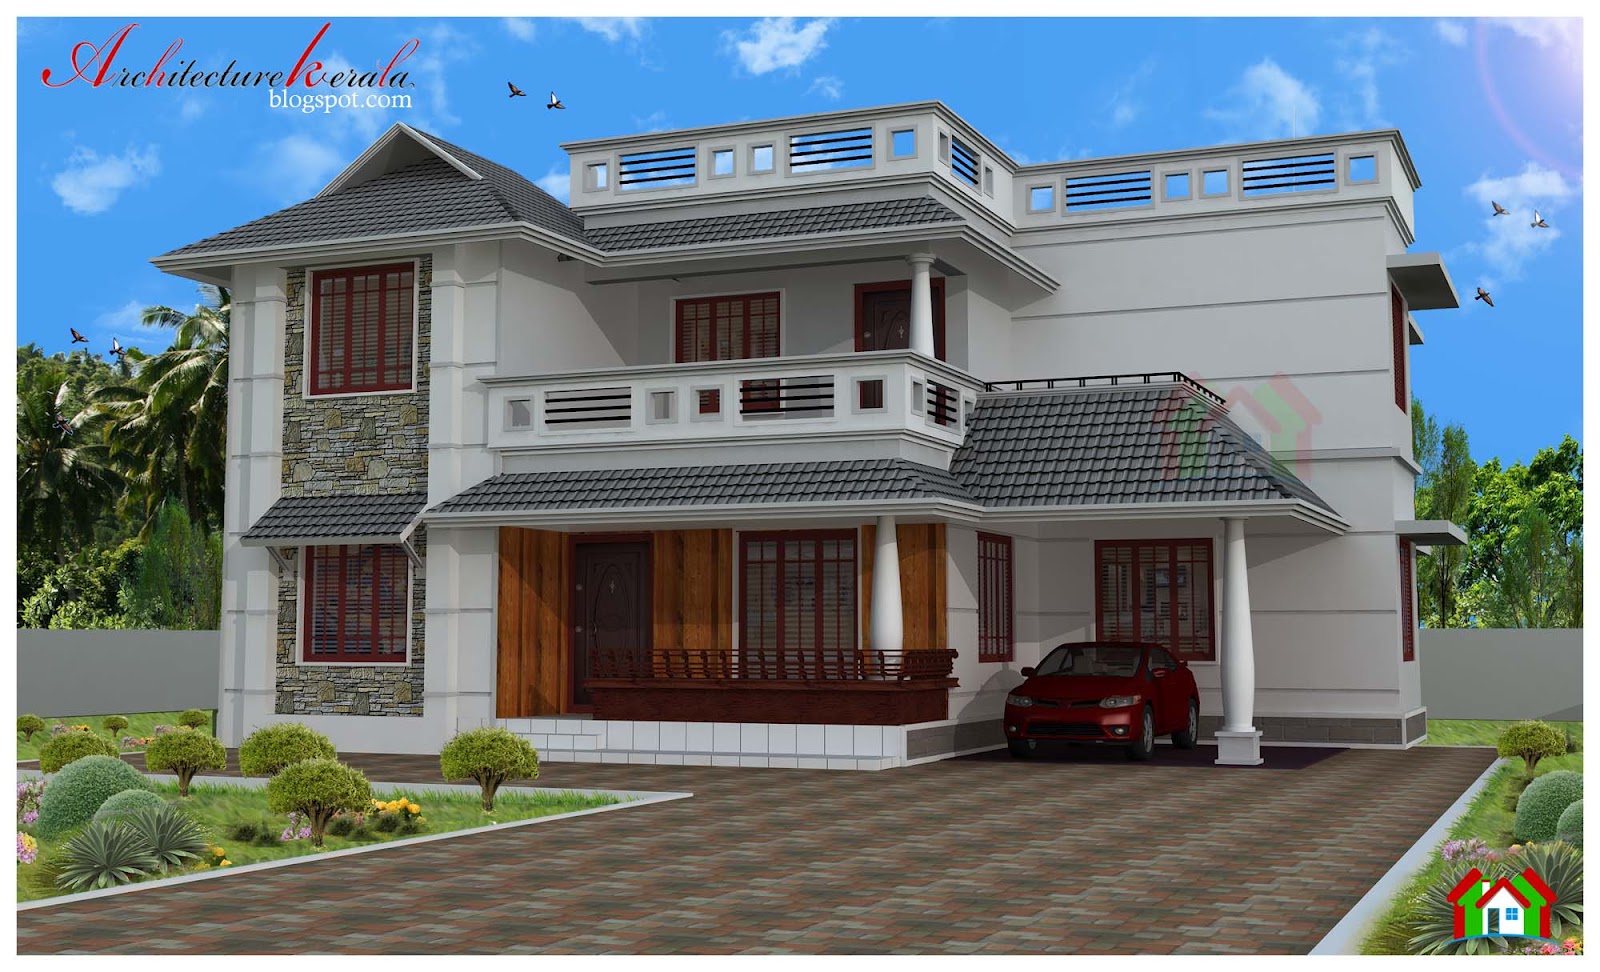 Architecture Kerala  FOUR BED ROOM HOUSE  PLAN 